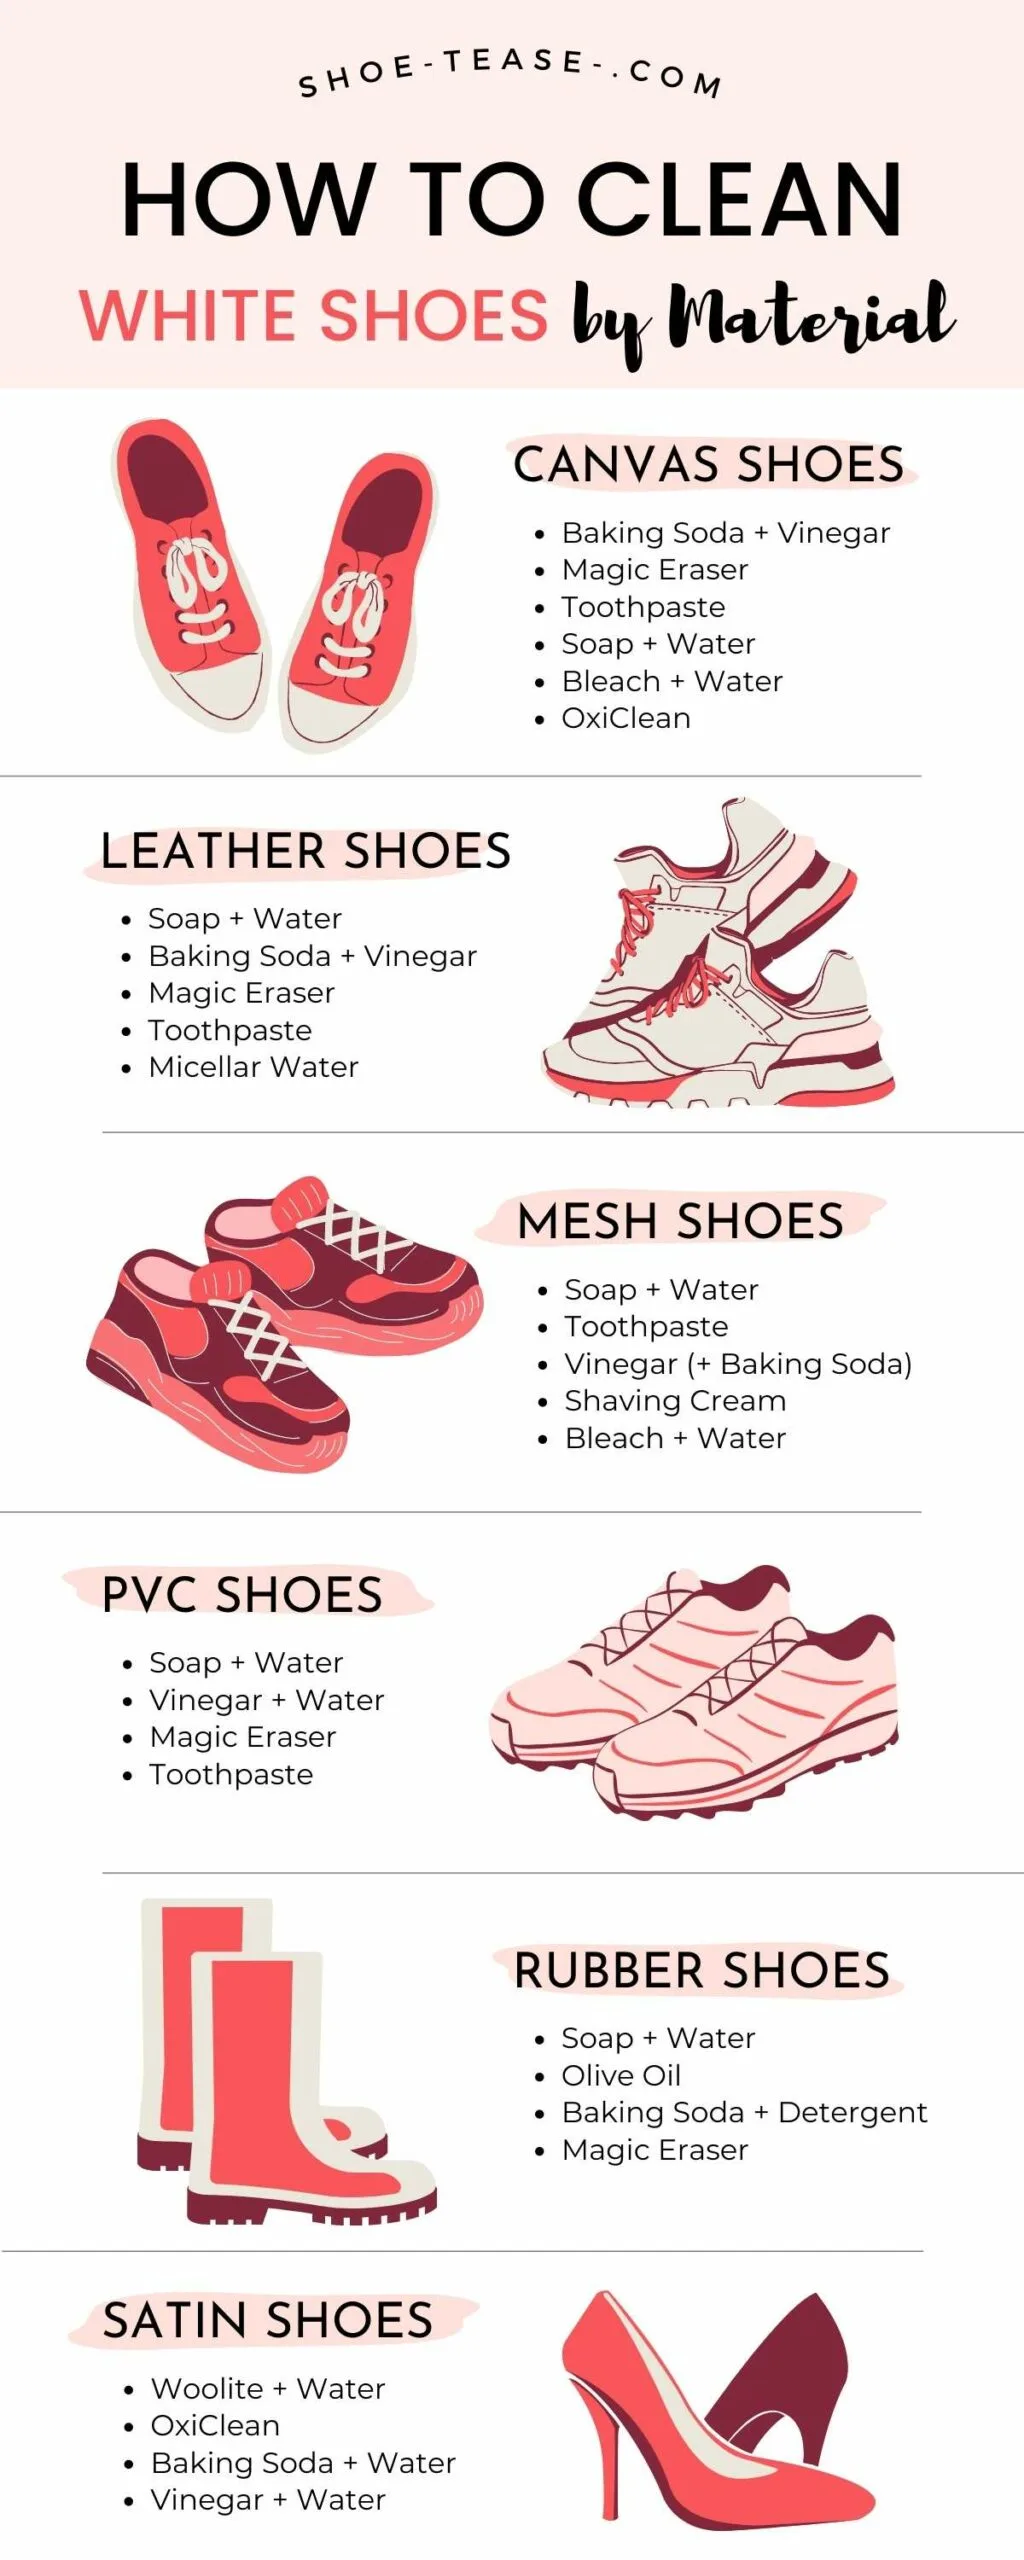 Infographic that shows how to clean white shoes by material with 5 images.